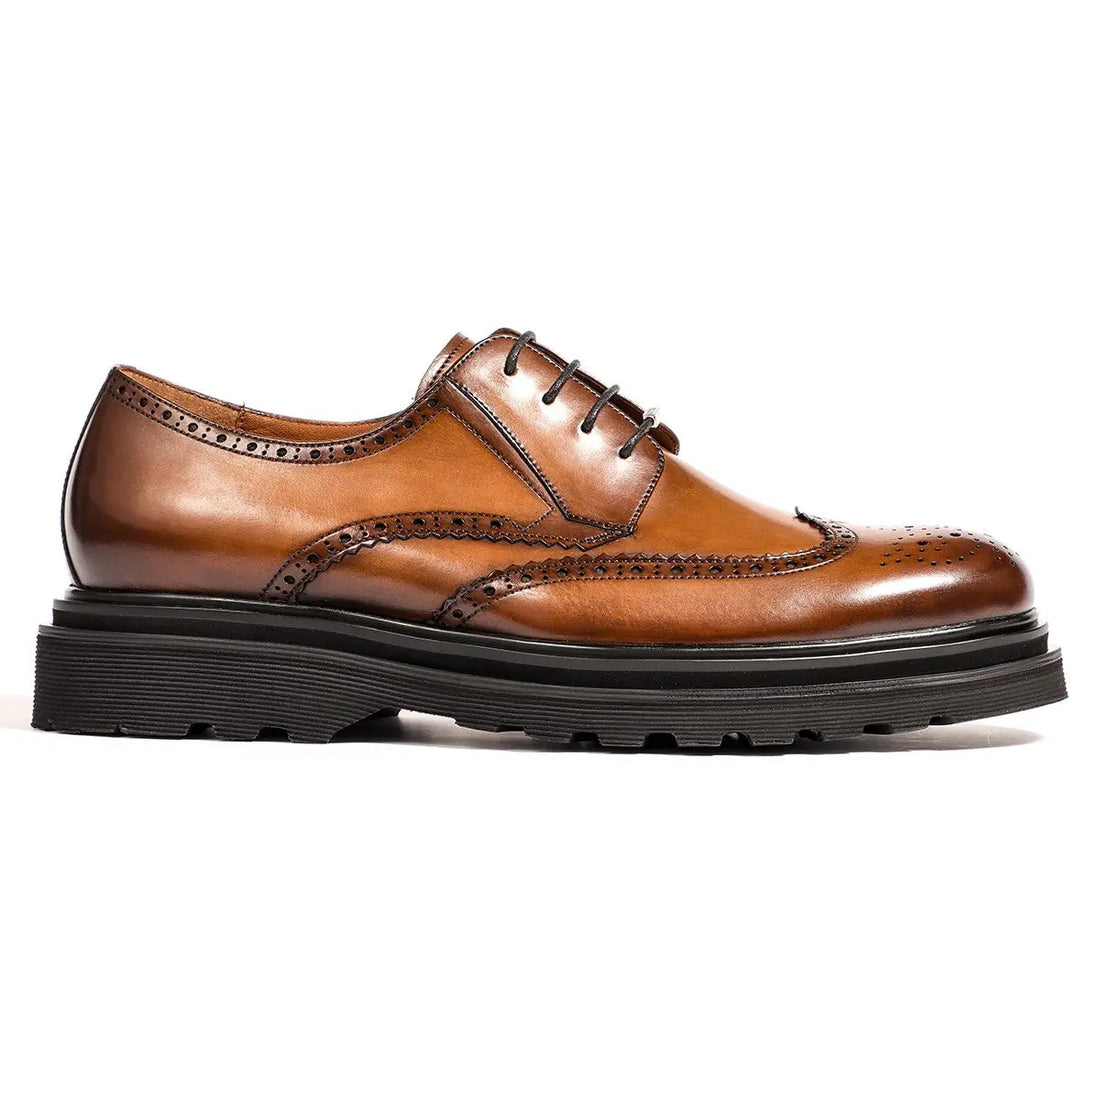 Genuine waxed leather brogue derby shoes high-end suit shoes 90109 Leizilei